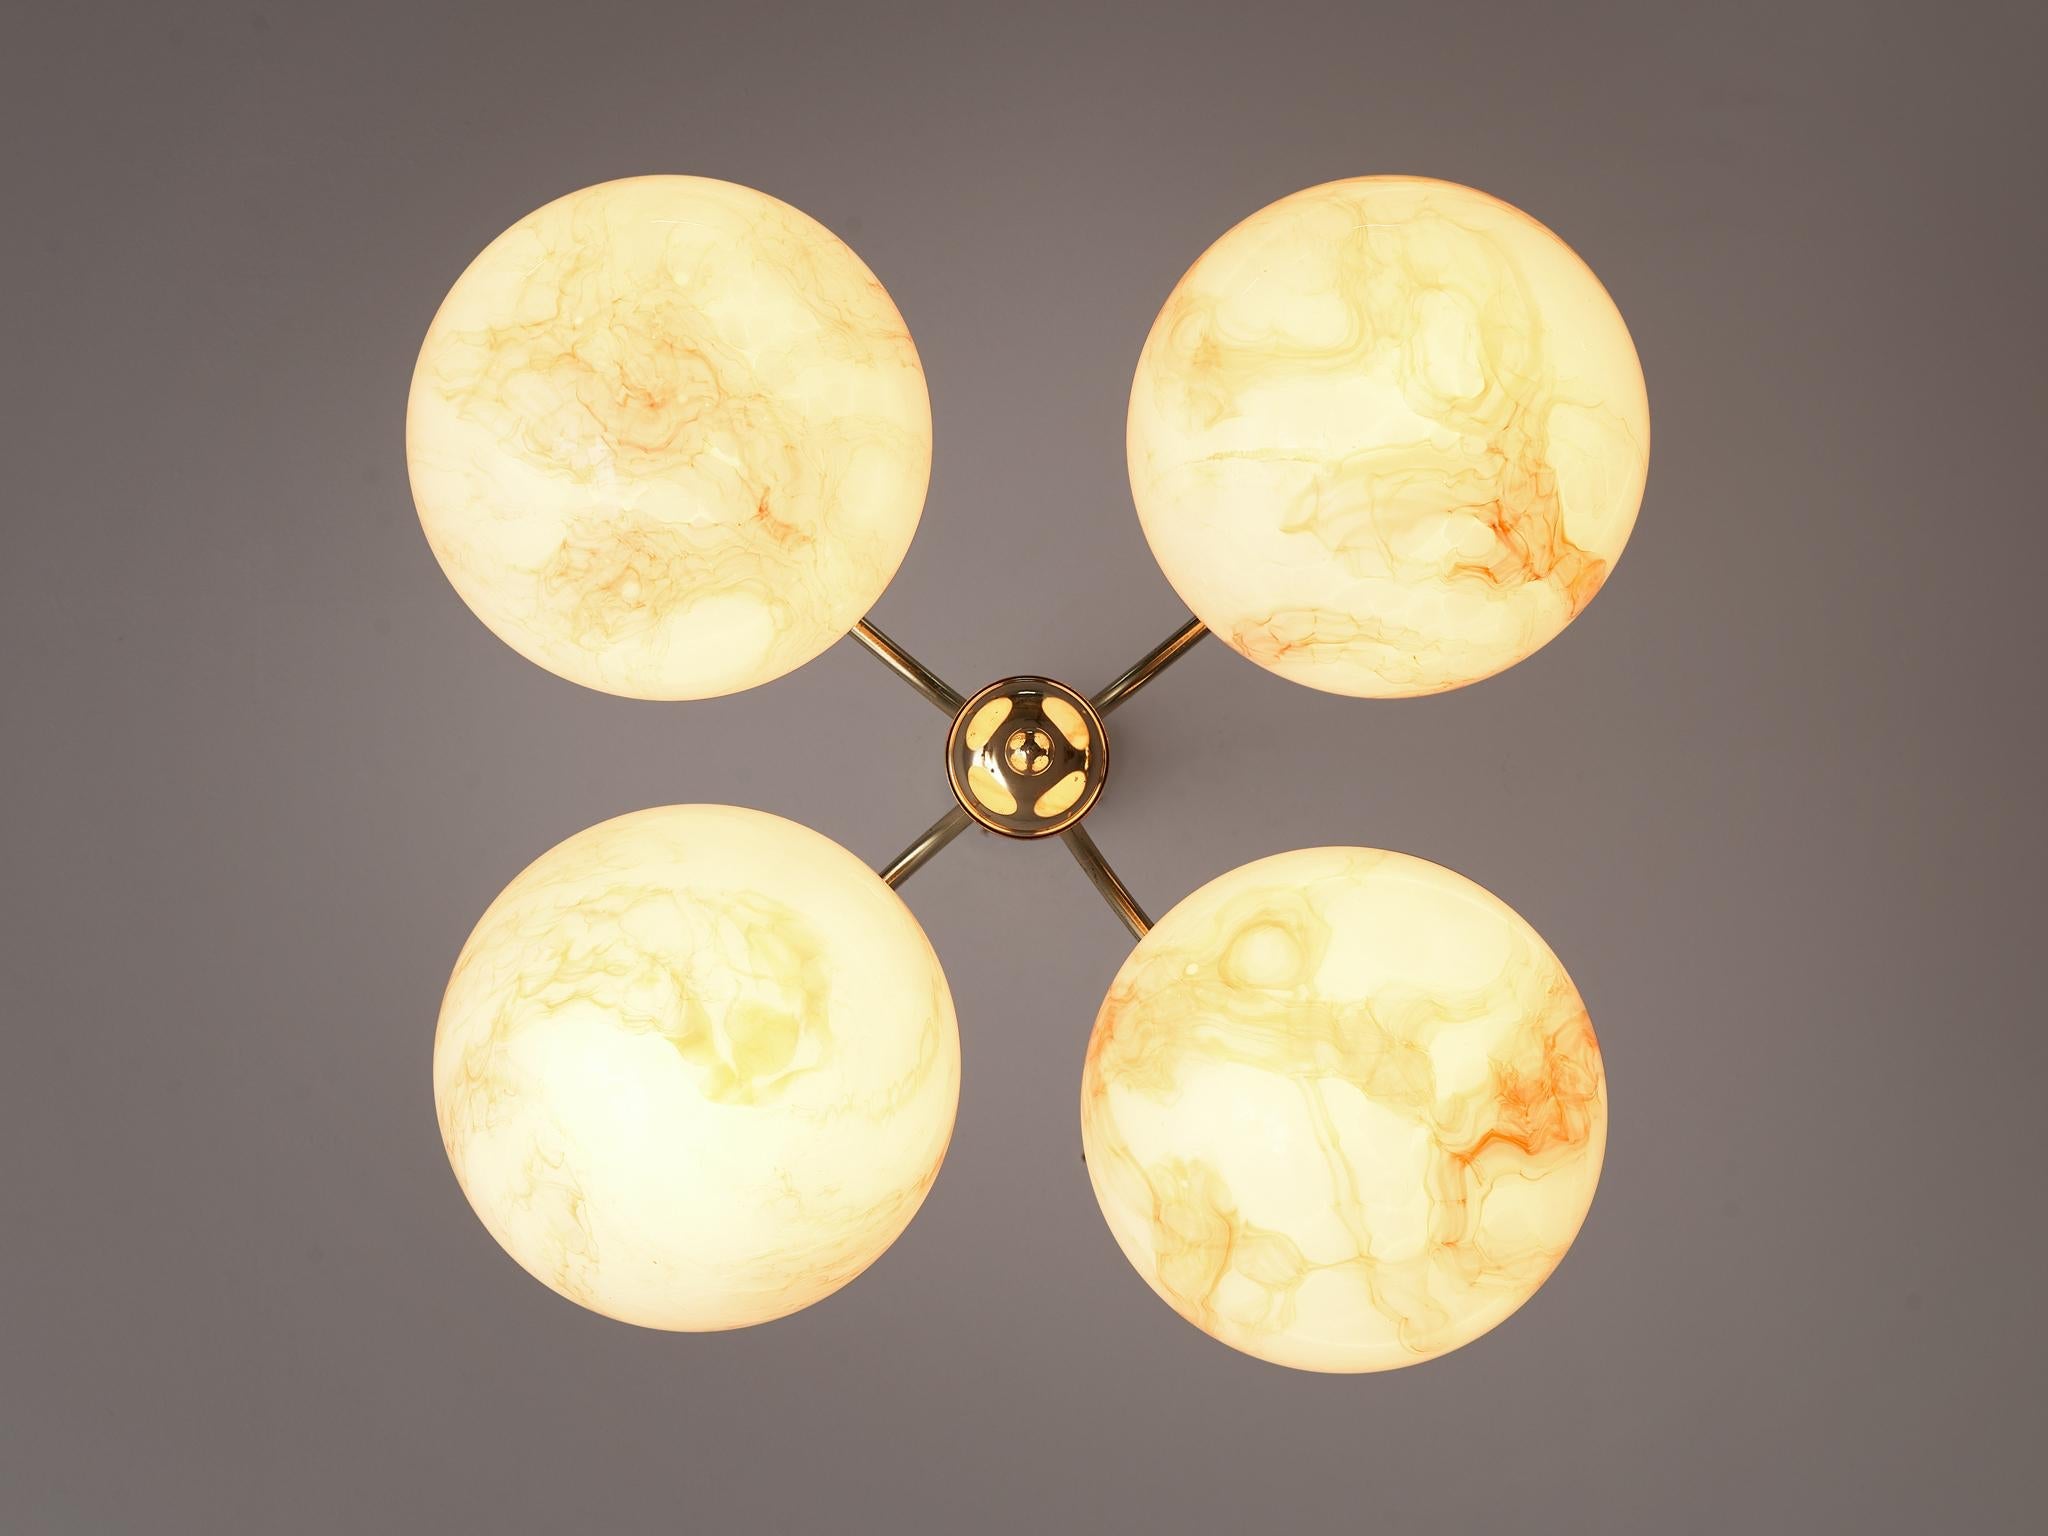 Chandelier with Brown Orange Marbled Glass Spheres and Brass